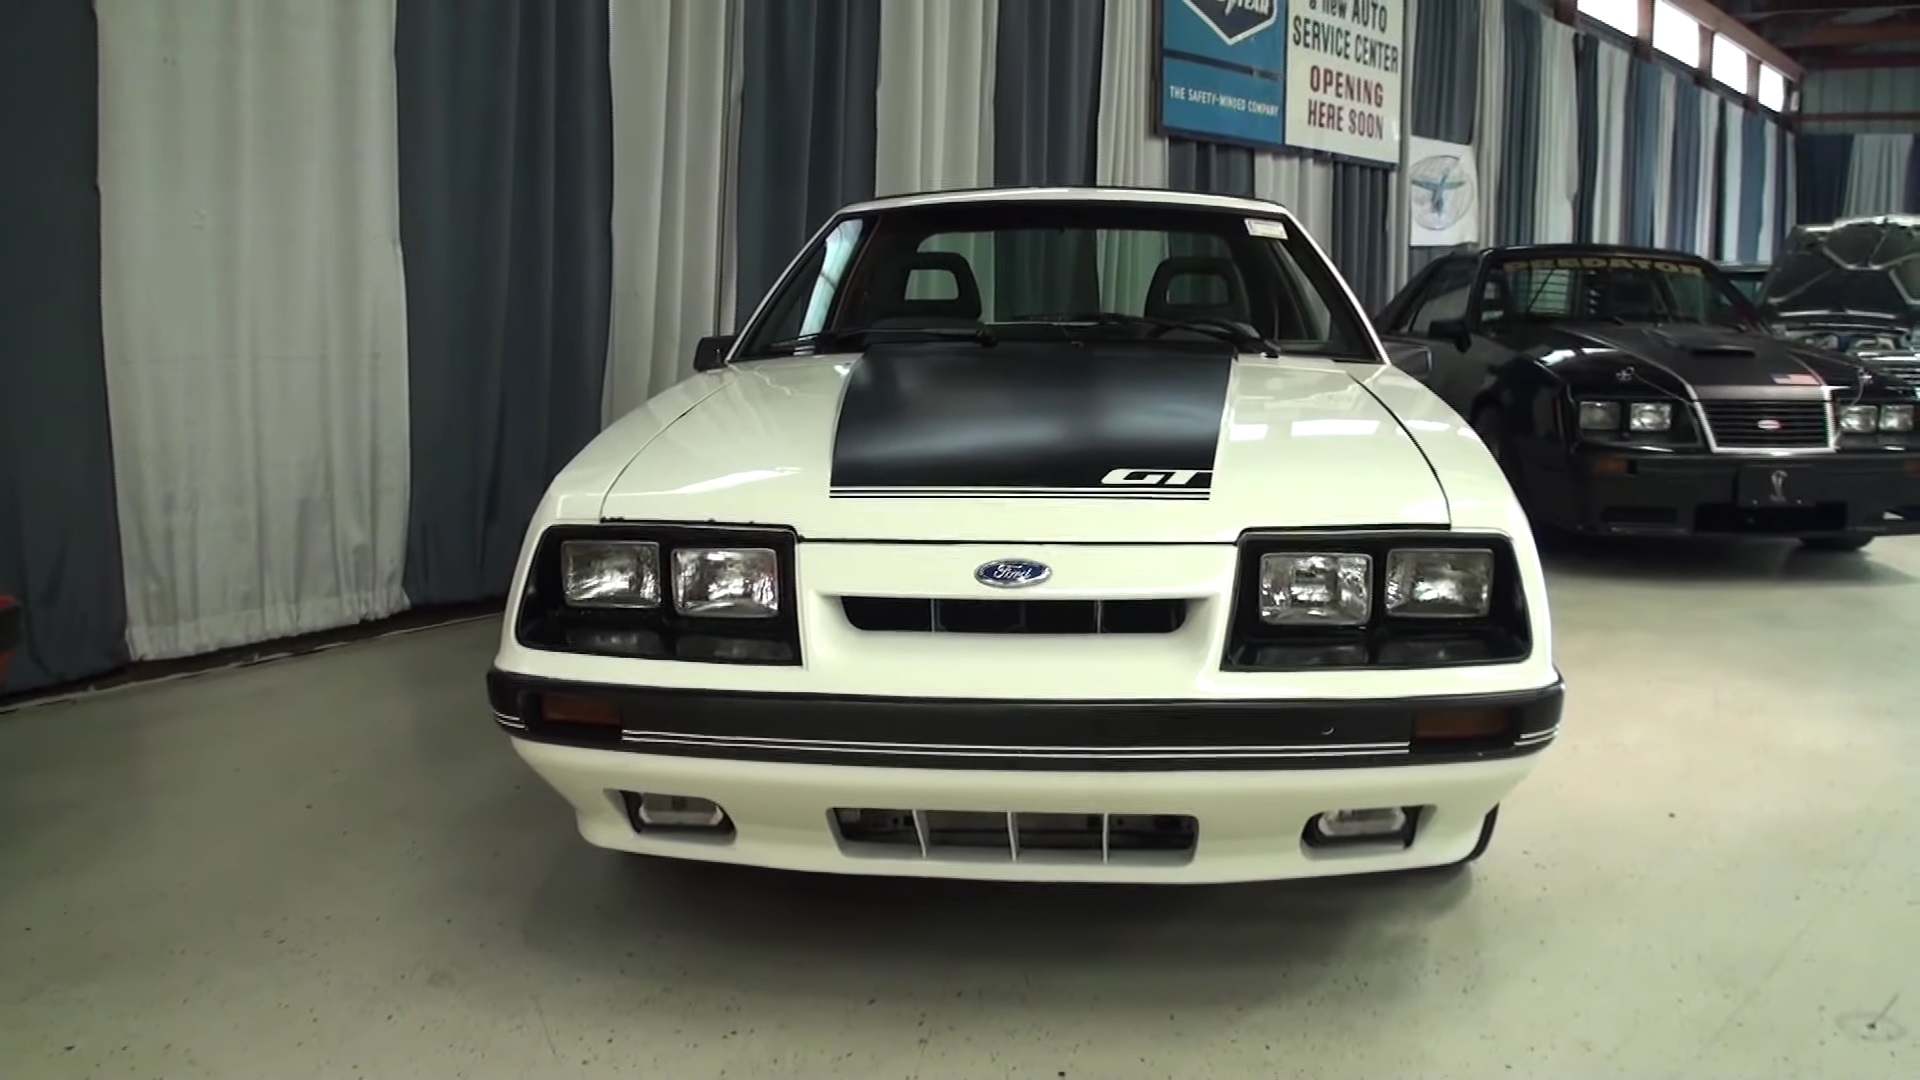 Video: 1985 Ford Mustang Twister II Special Overview + Engine Sound